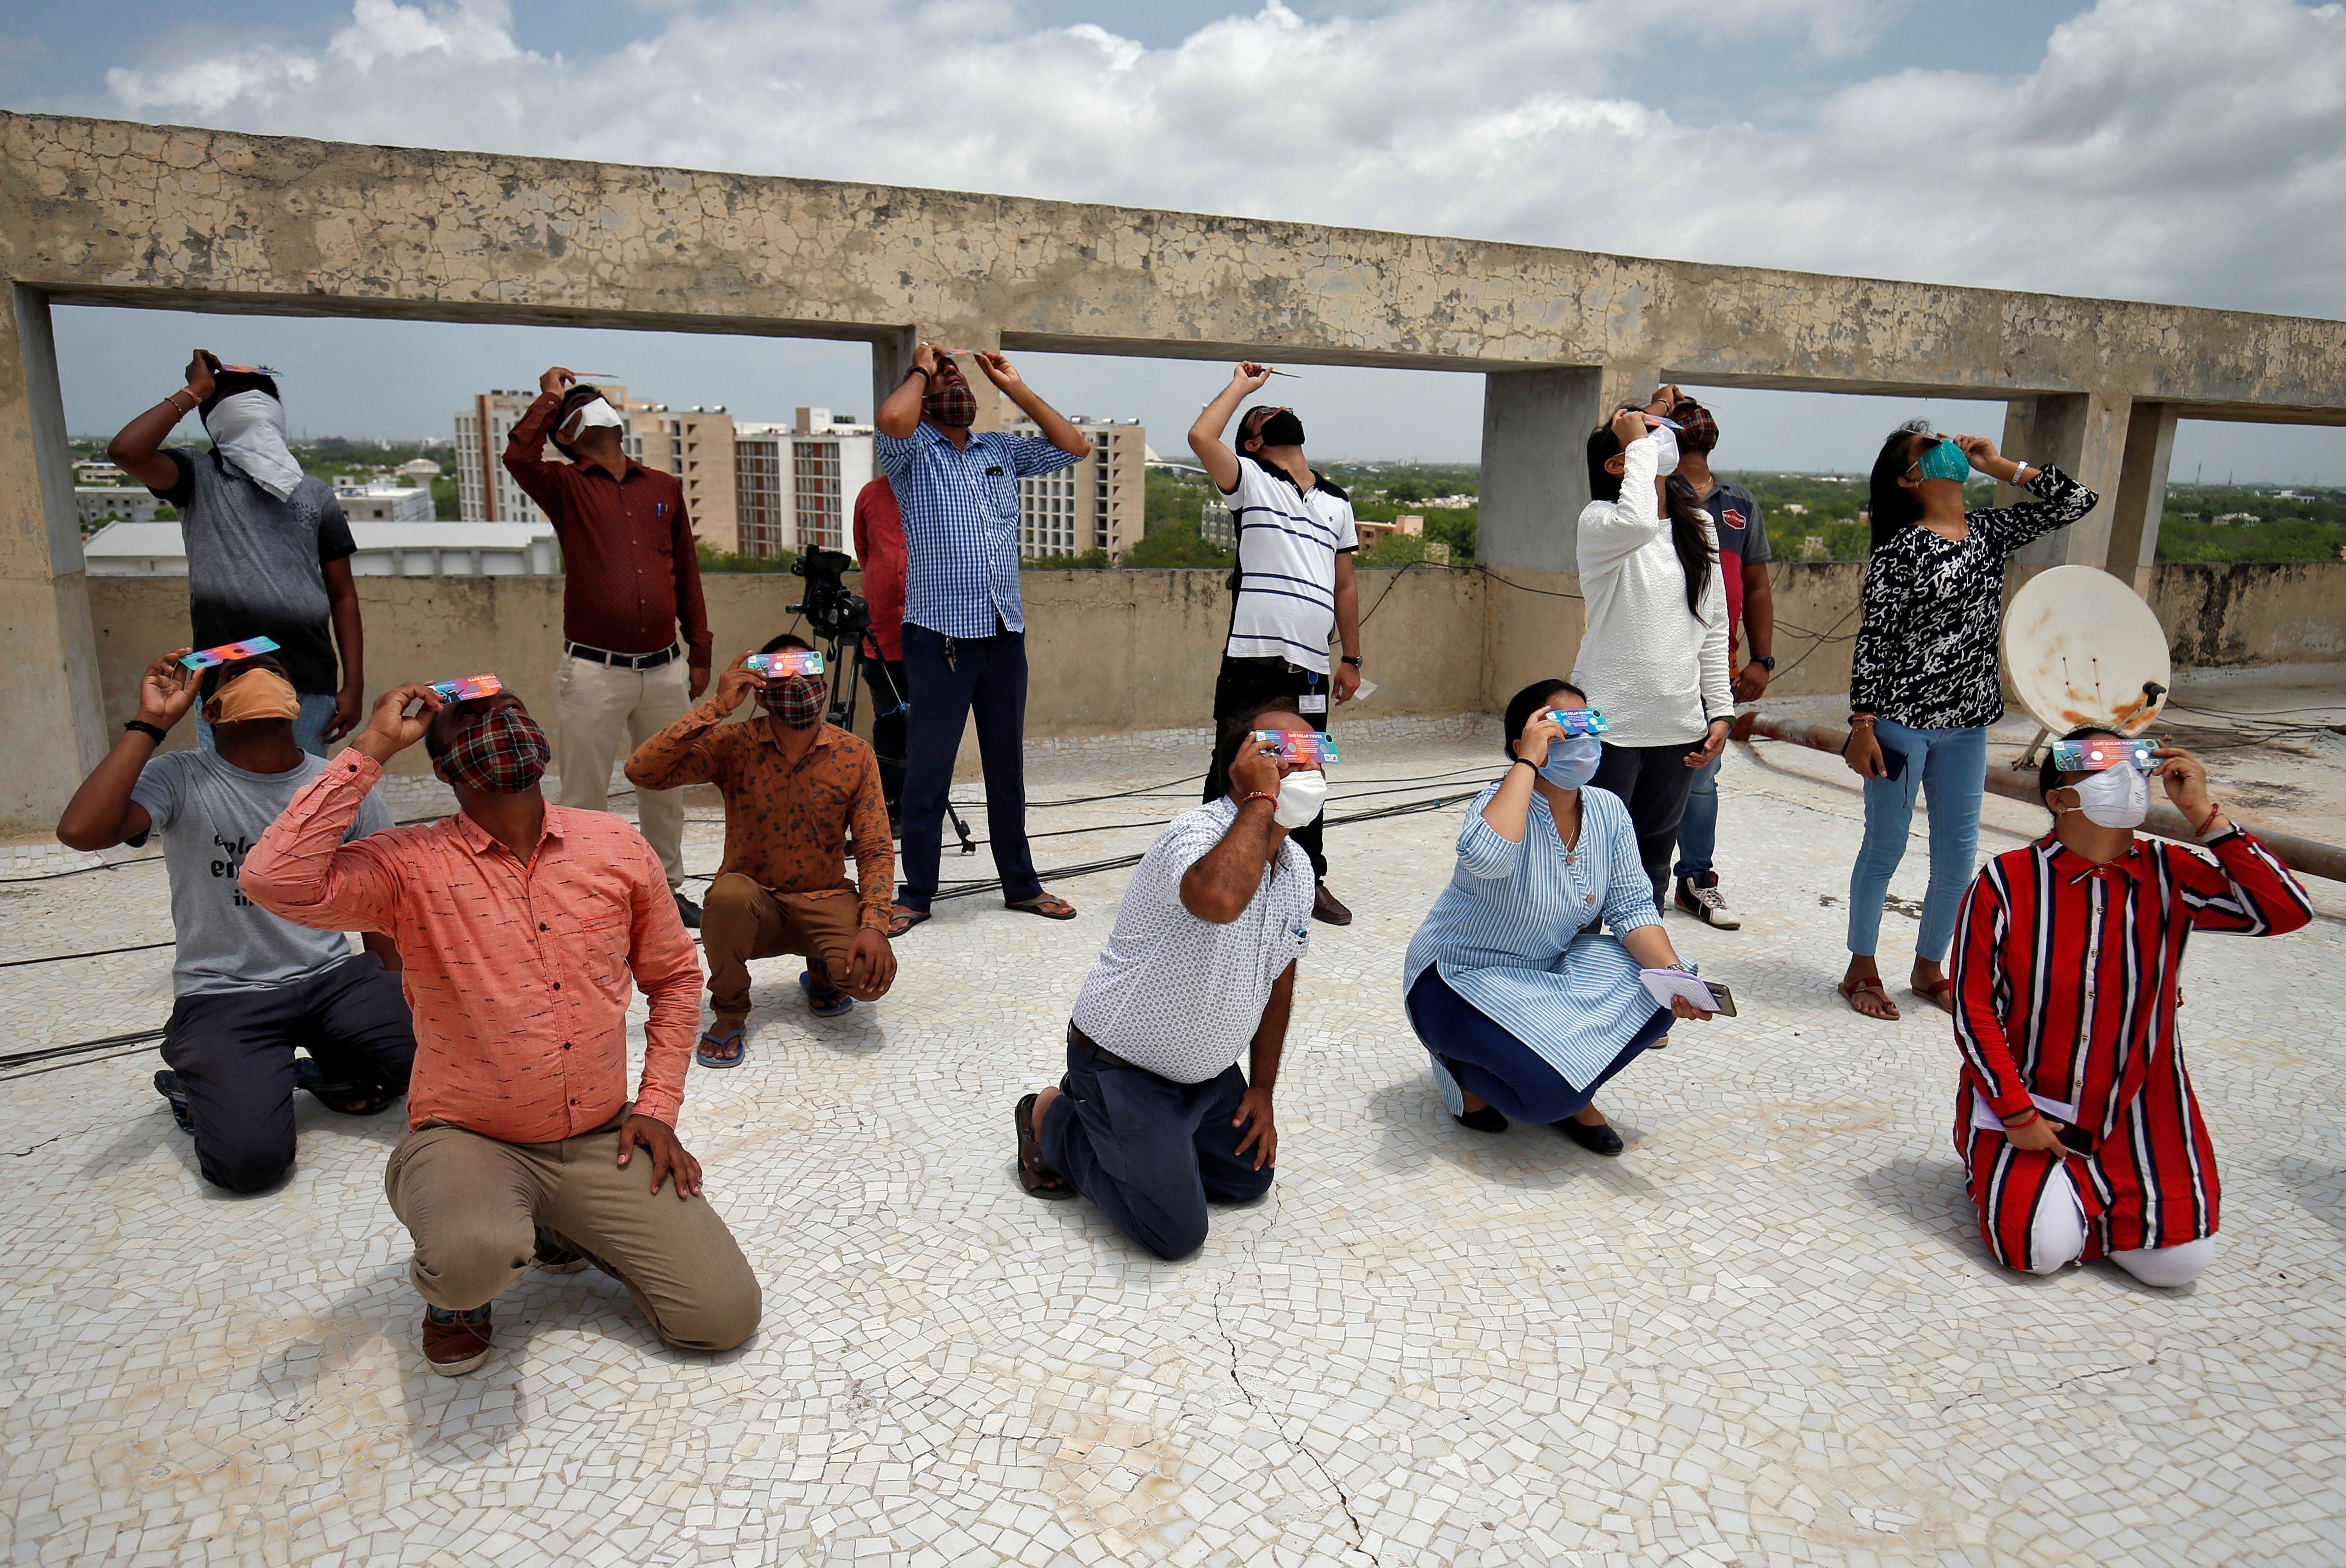 People, wearing protective face masks against the coronavirus disease (COVID-19) outbreak, use solar viewers to watch a partial solar eclipse at Gandhinagar, India, June 21, 2020. REUTERS/Amit Dave